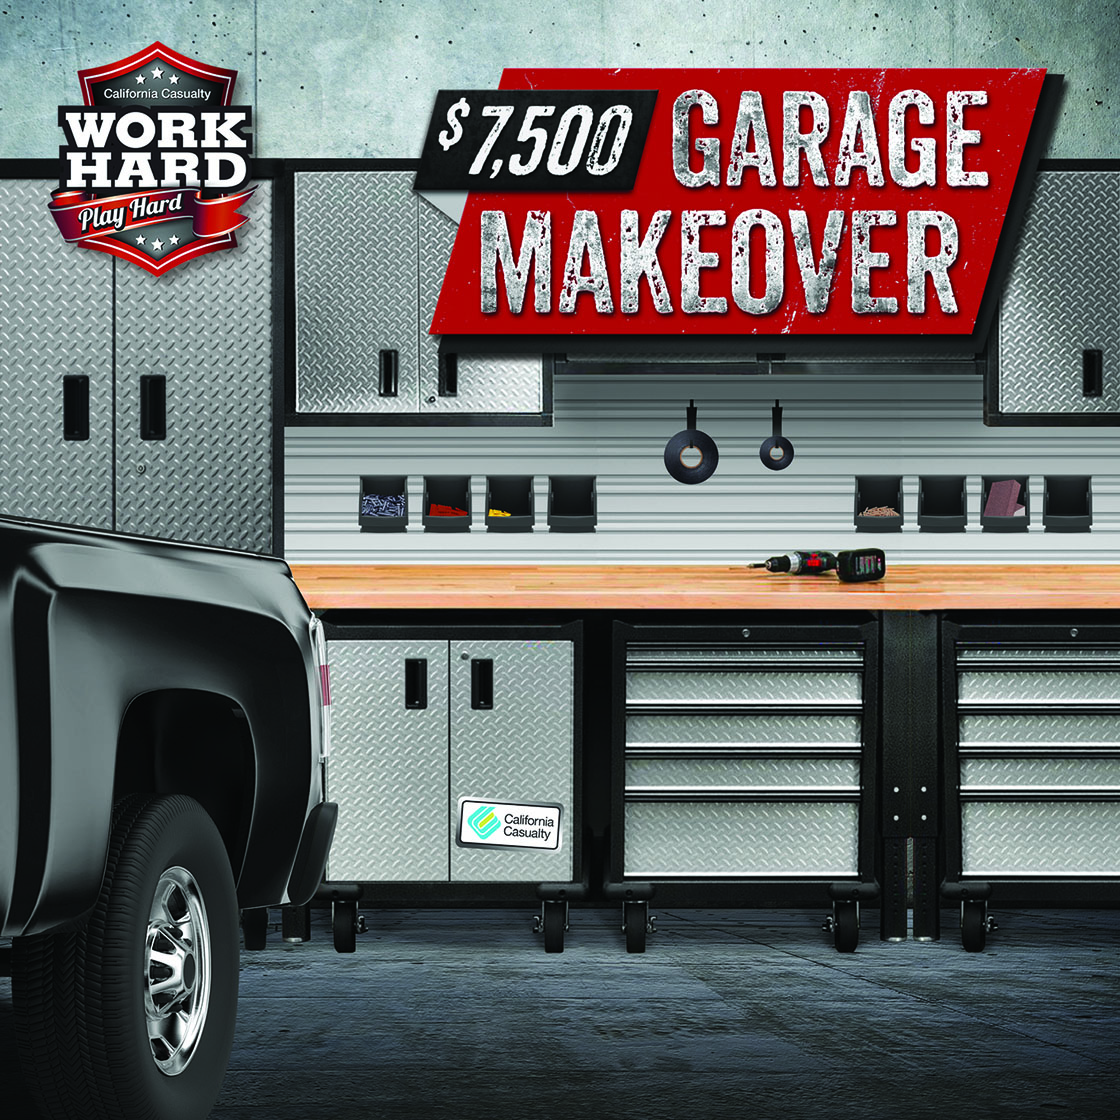 Enter by October 31 for California Casualty's $7,500 Garage Makeover